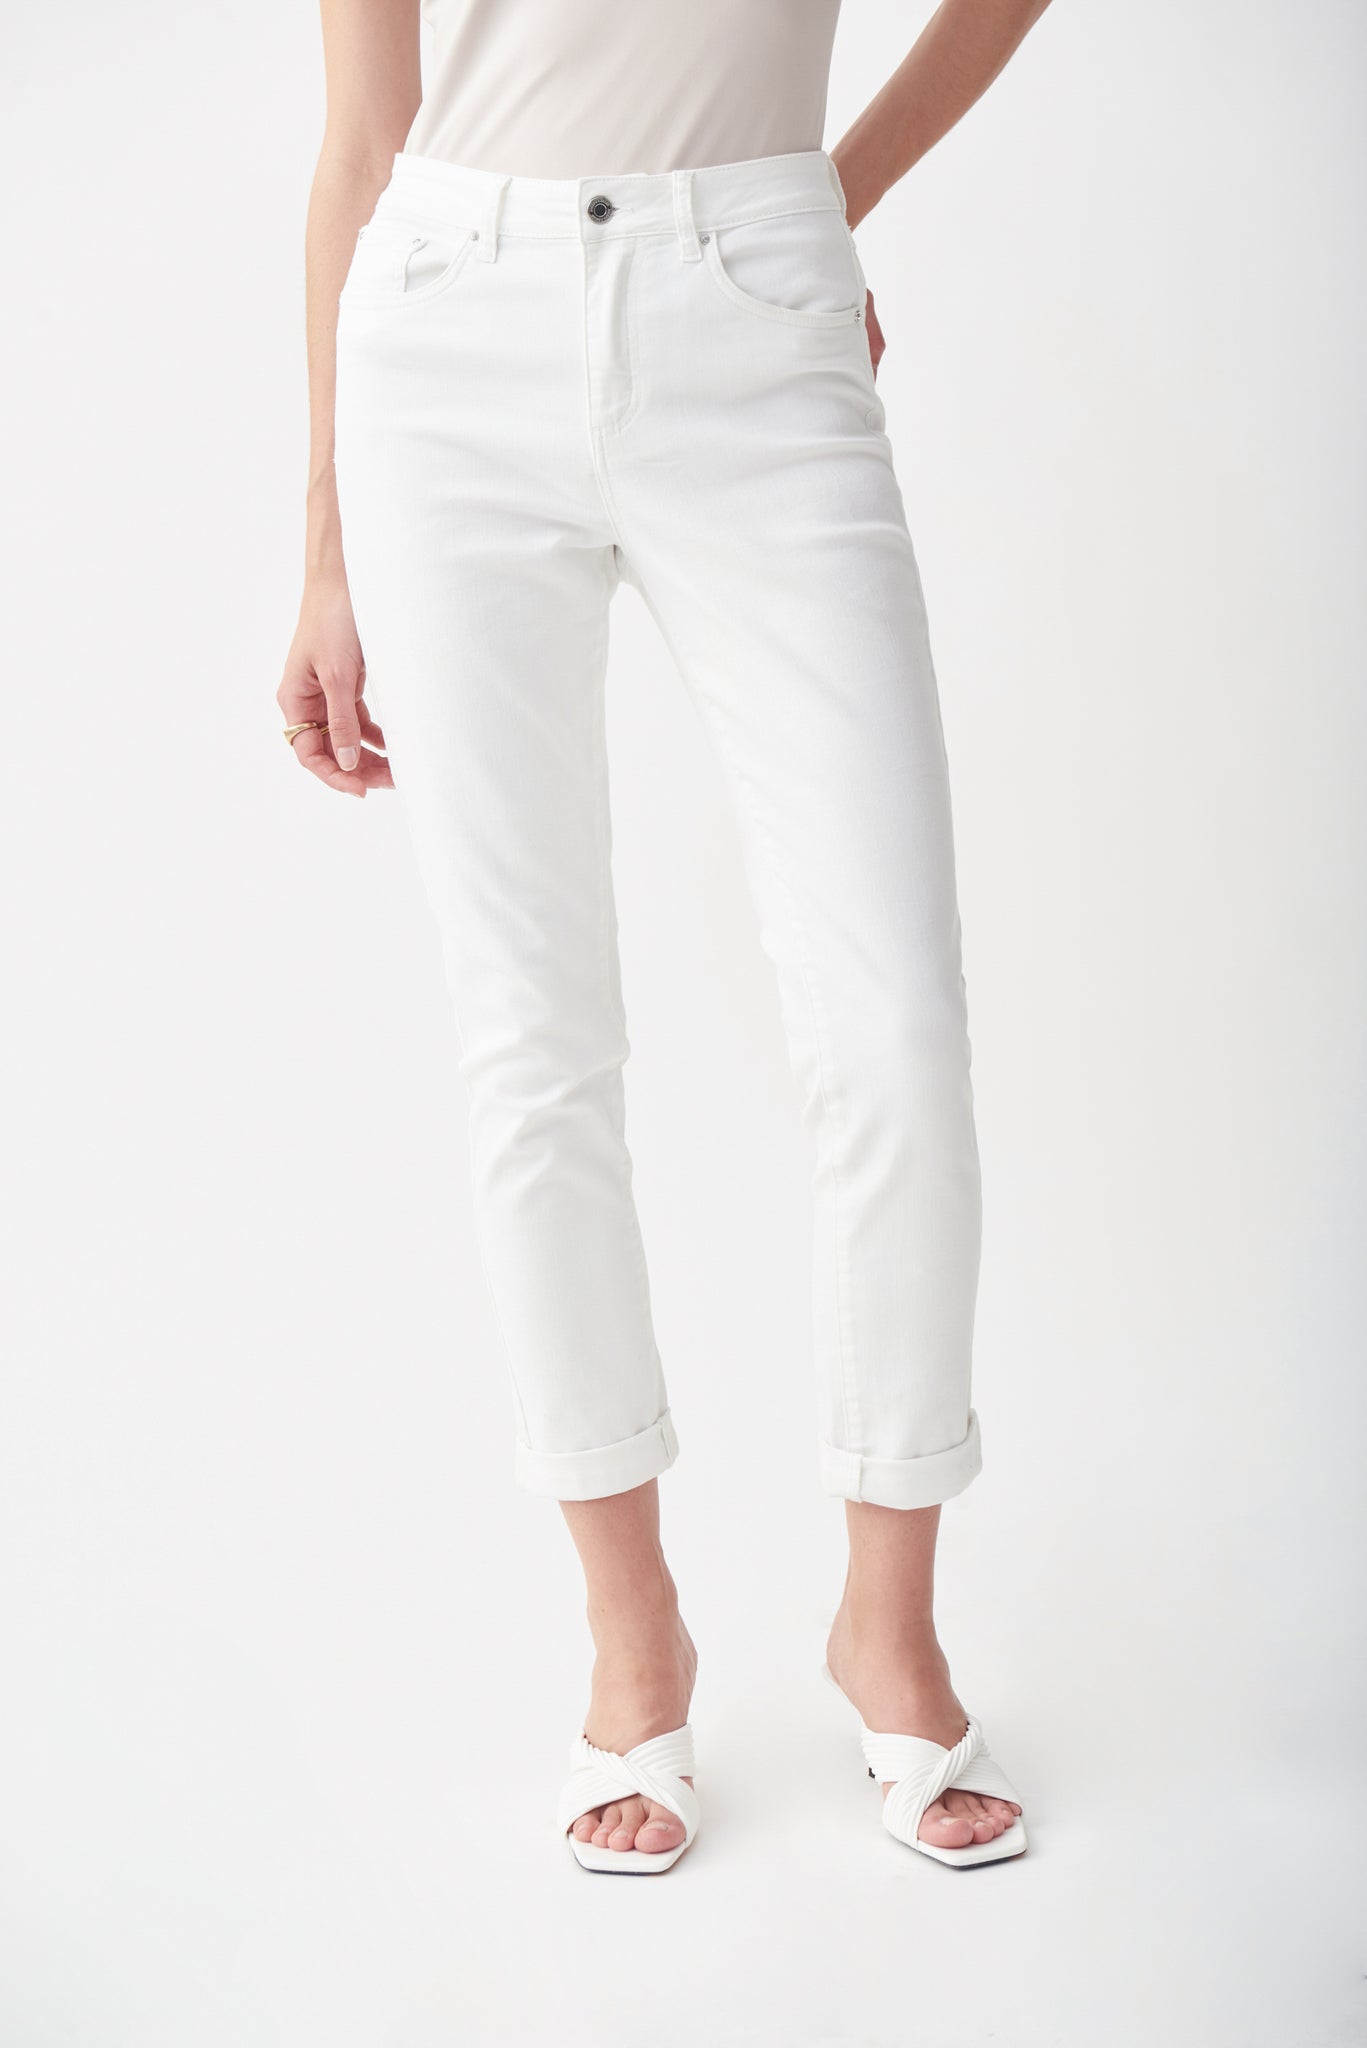 Joseph Ribkoff Cropped Jeans Style Pant